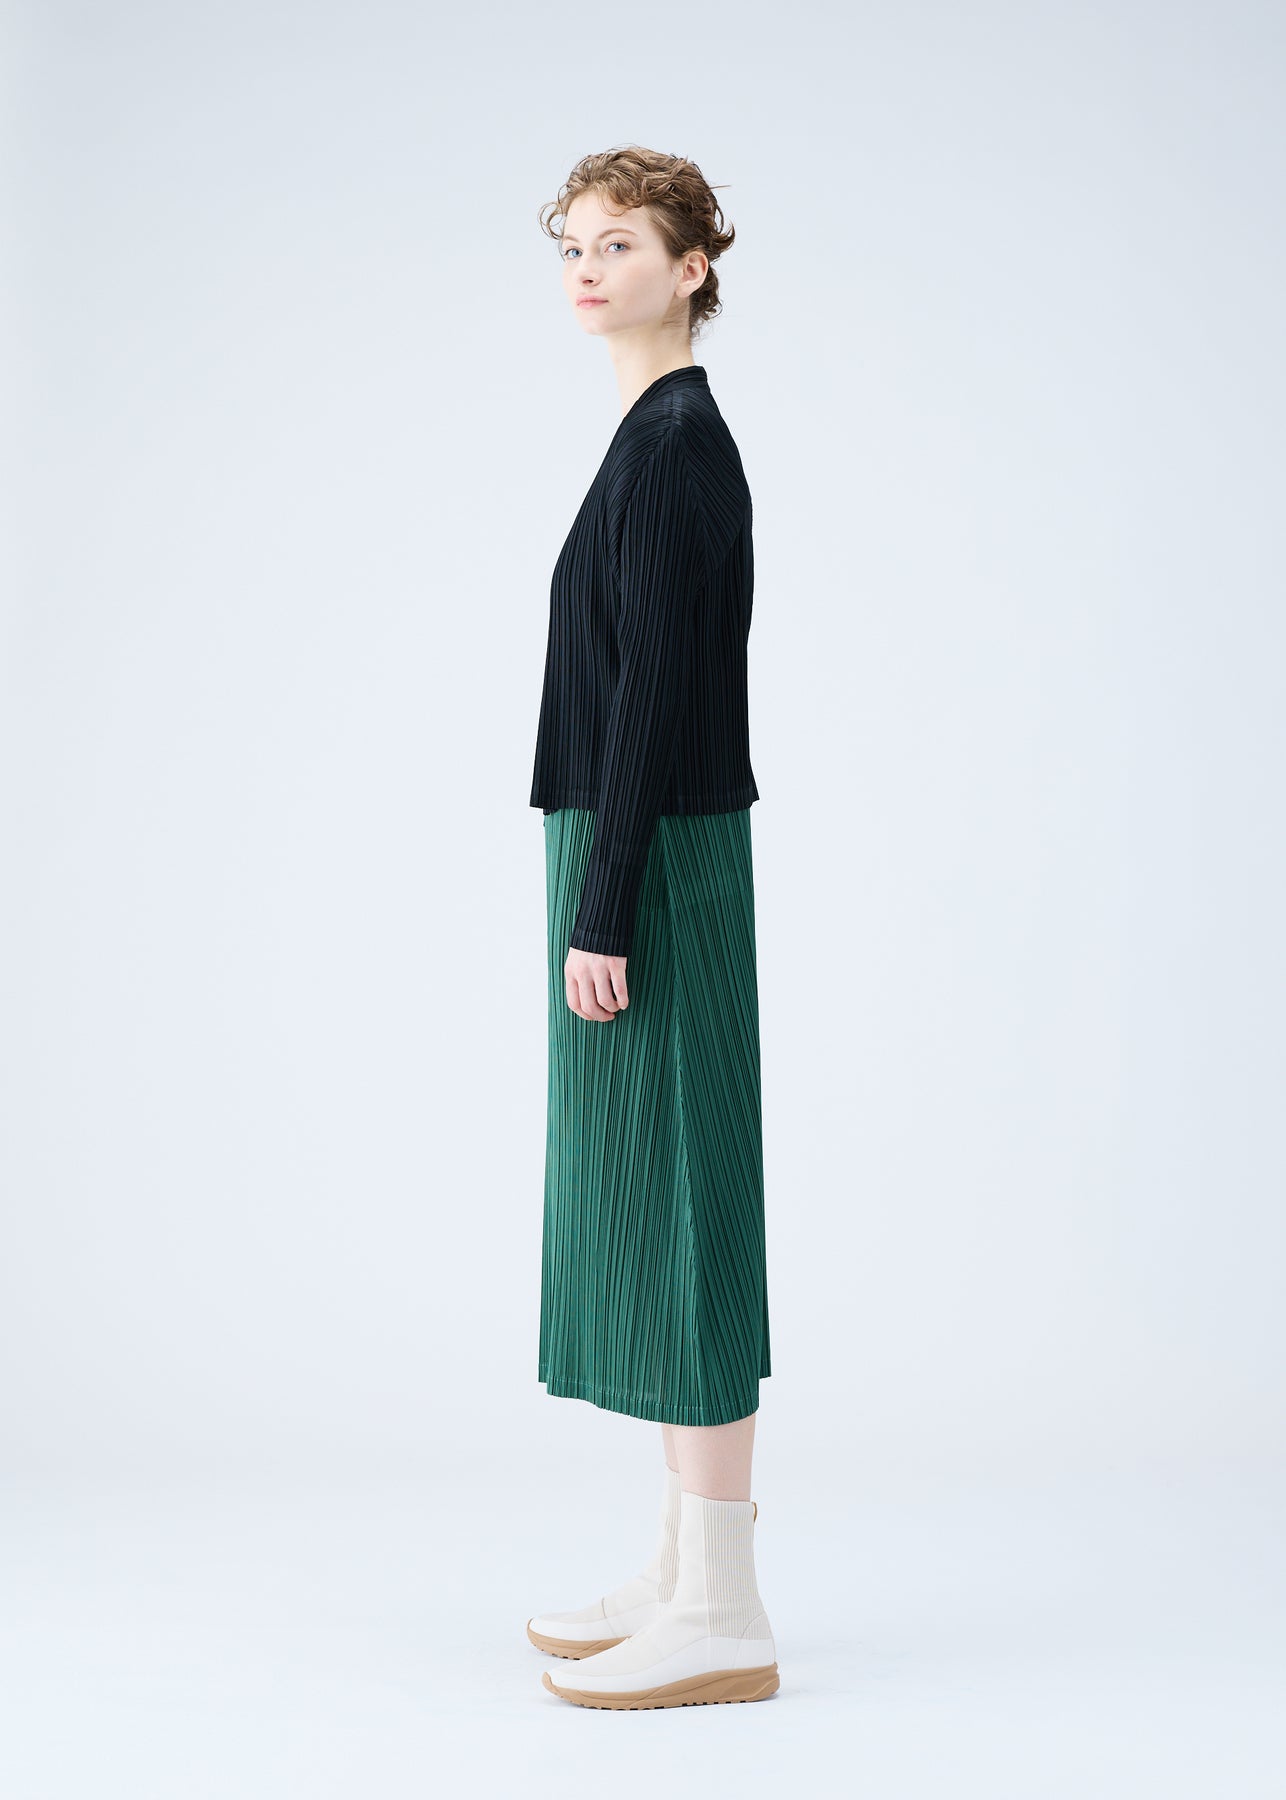 MONTHLY COLORS : DECEMBER CARDIGAN | The official ISSEY MIYAKE 